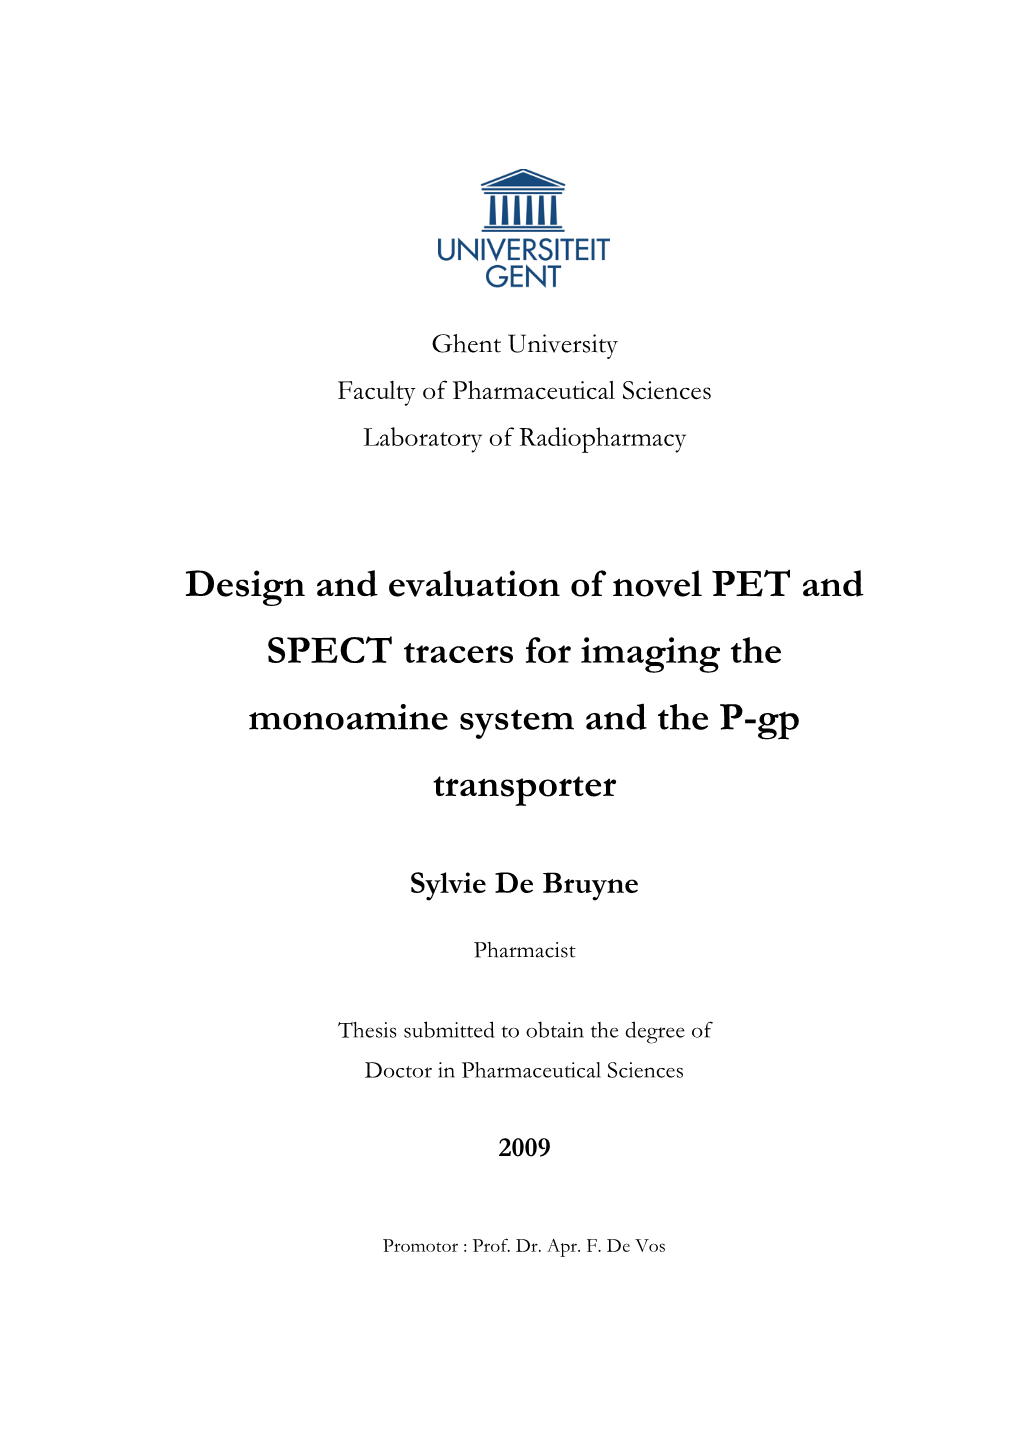 Design and Evaluation of Novel PET and SPECT Tracers for Imaging the Monoamine System and the P-Gp Transporter